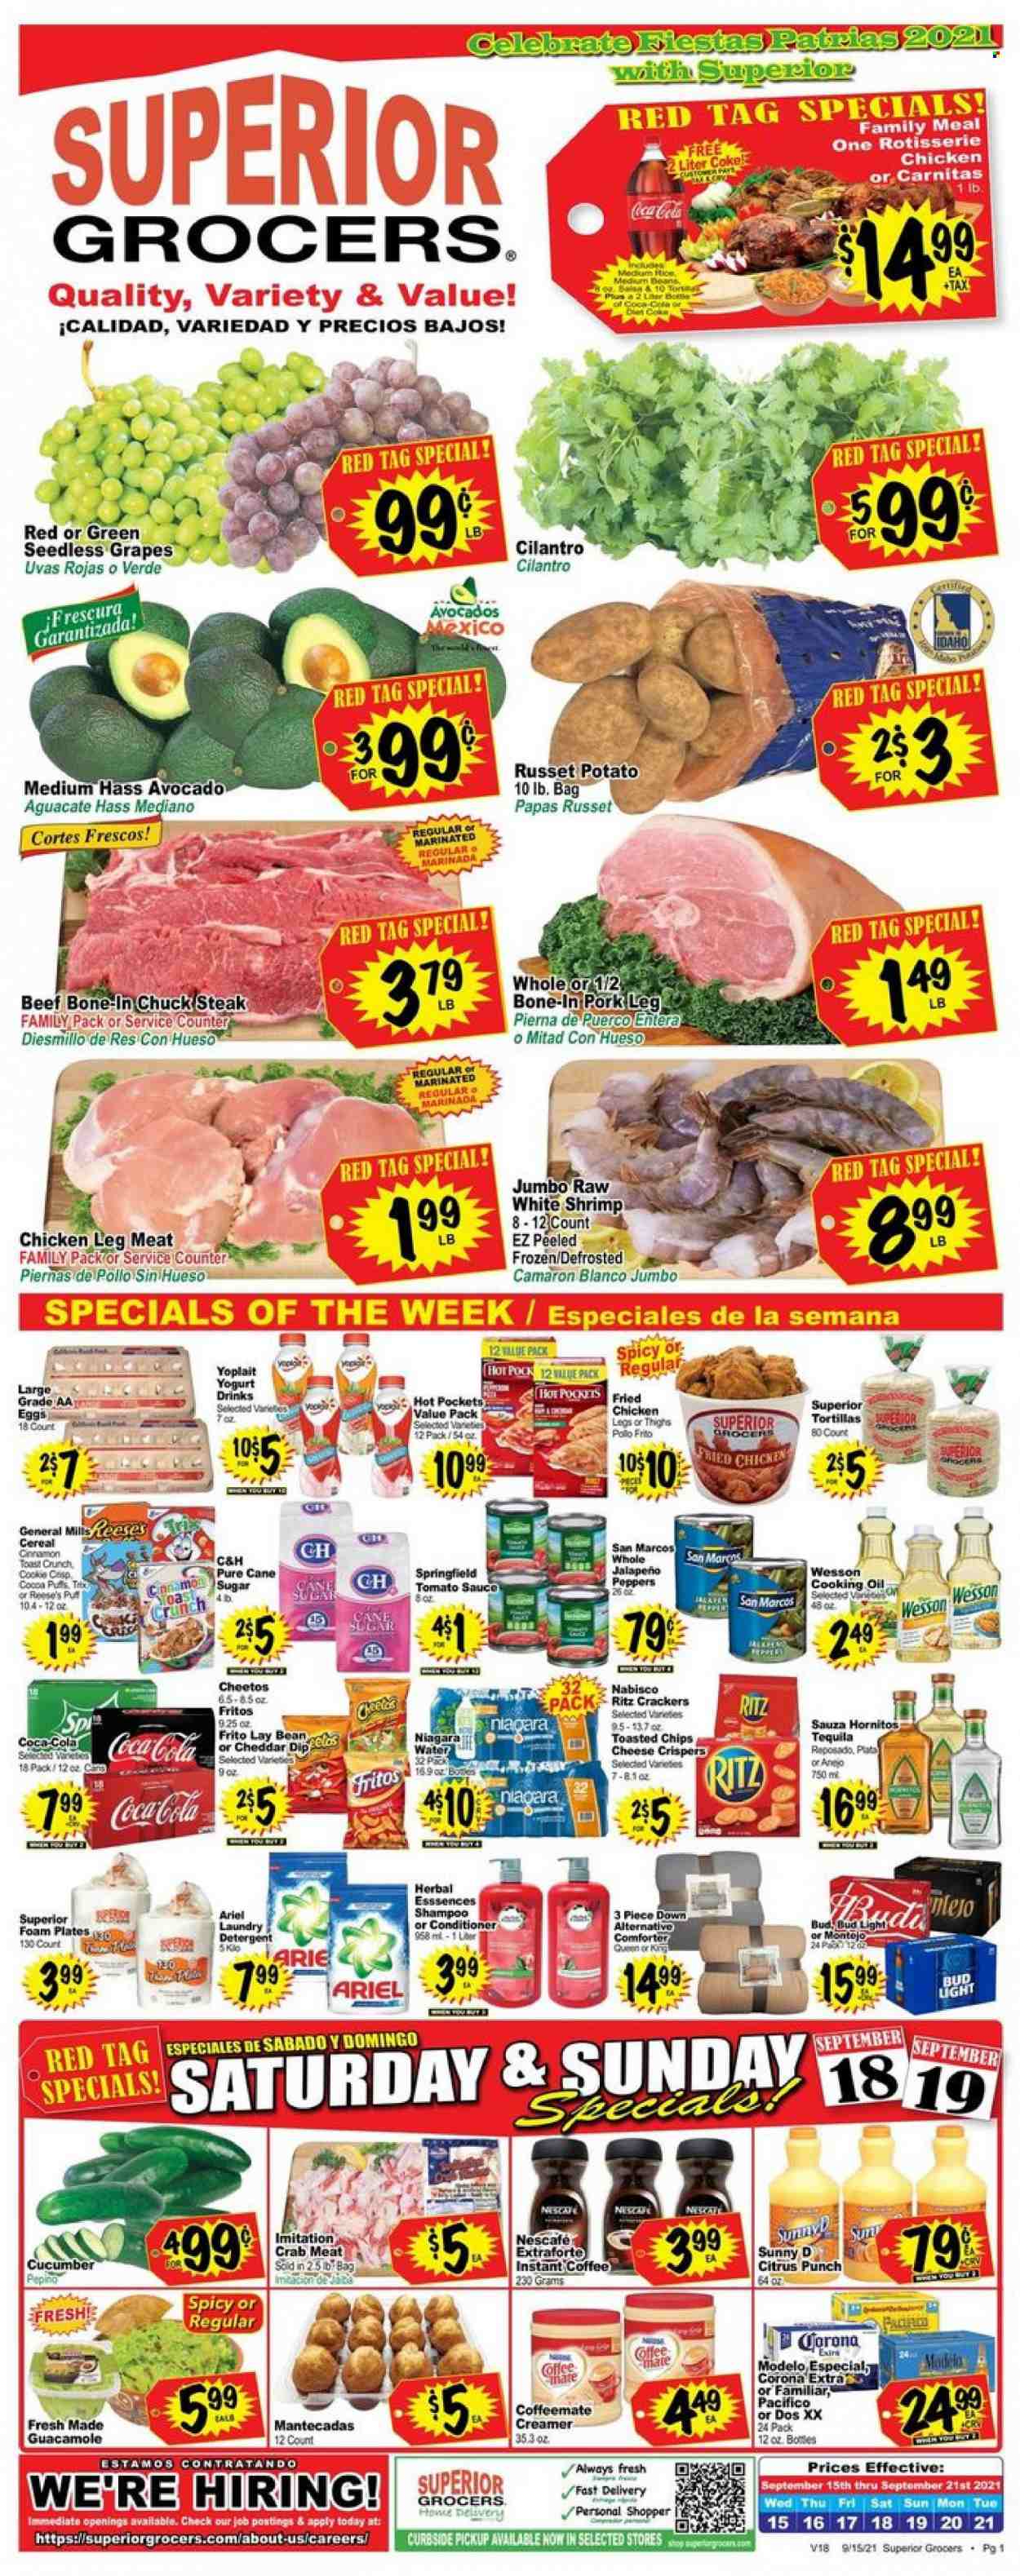 thumbnail - Superior Grocers Flyer - 09/15/2021 - 09/21/2021 - Sales products - seedless grapes, tortillas, russet potatoes, jalapeño, grapes, beef meat, steak, chuck steak, pork meat, pork leg, crab meat, crab, shrimps, hot pocket, chicken roast, sauce, fried chicken, guacamole, yoghurt, Yoplait, Coffee-Mate, yoghurt drink, eggs, creamer, Reese's, crackers, RITZ, Fritos, Cheetos, cane sugar, sugar, tomato sauce, cereals, cilantro, cinnamon, salsa, oil, Coca-Cola, fruit punch, instant coffee, Nescafé, tequila, beer, Bud Light, Corona Extra, Modelo, Ariel, laundry detergent, conditioner, plate, foam plates. Page 1.